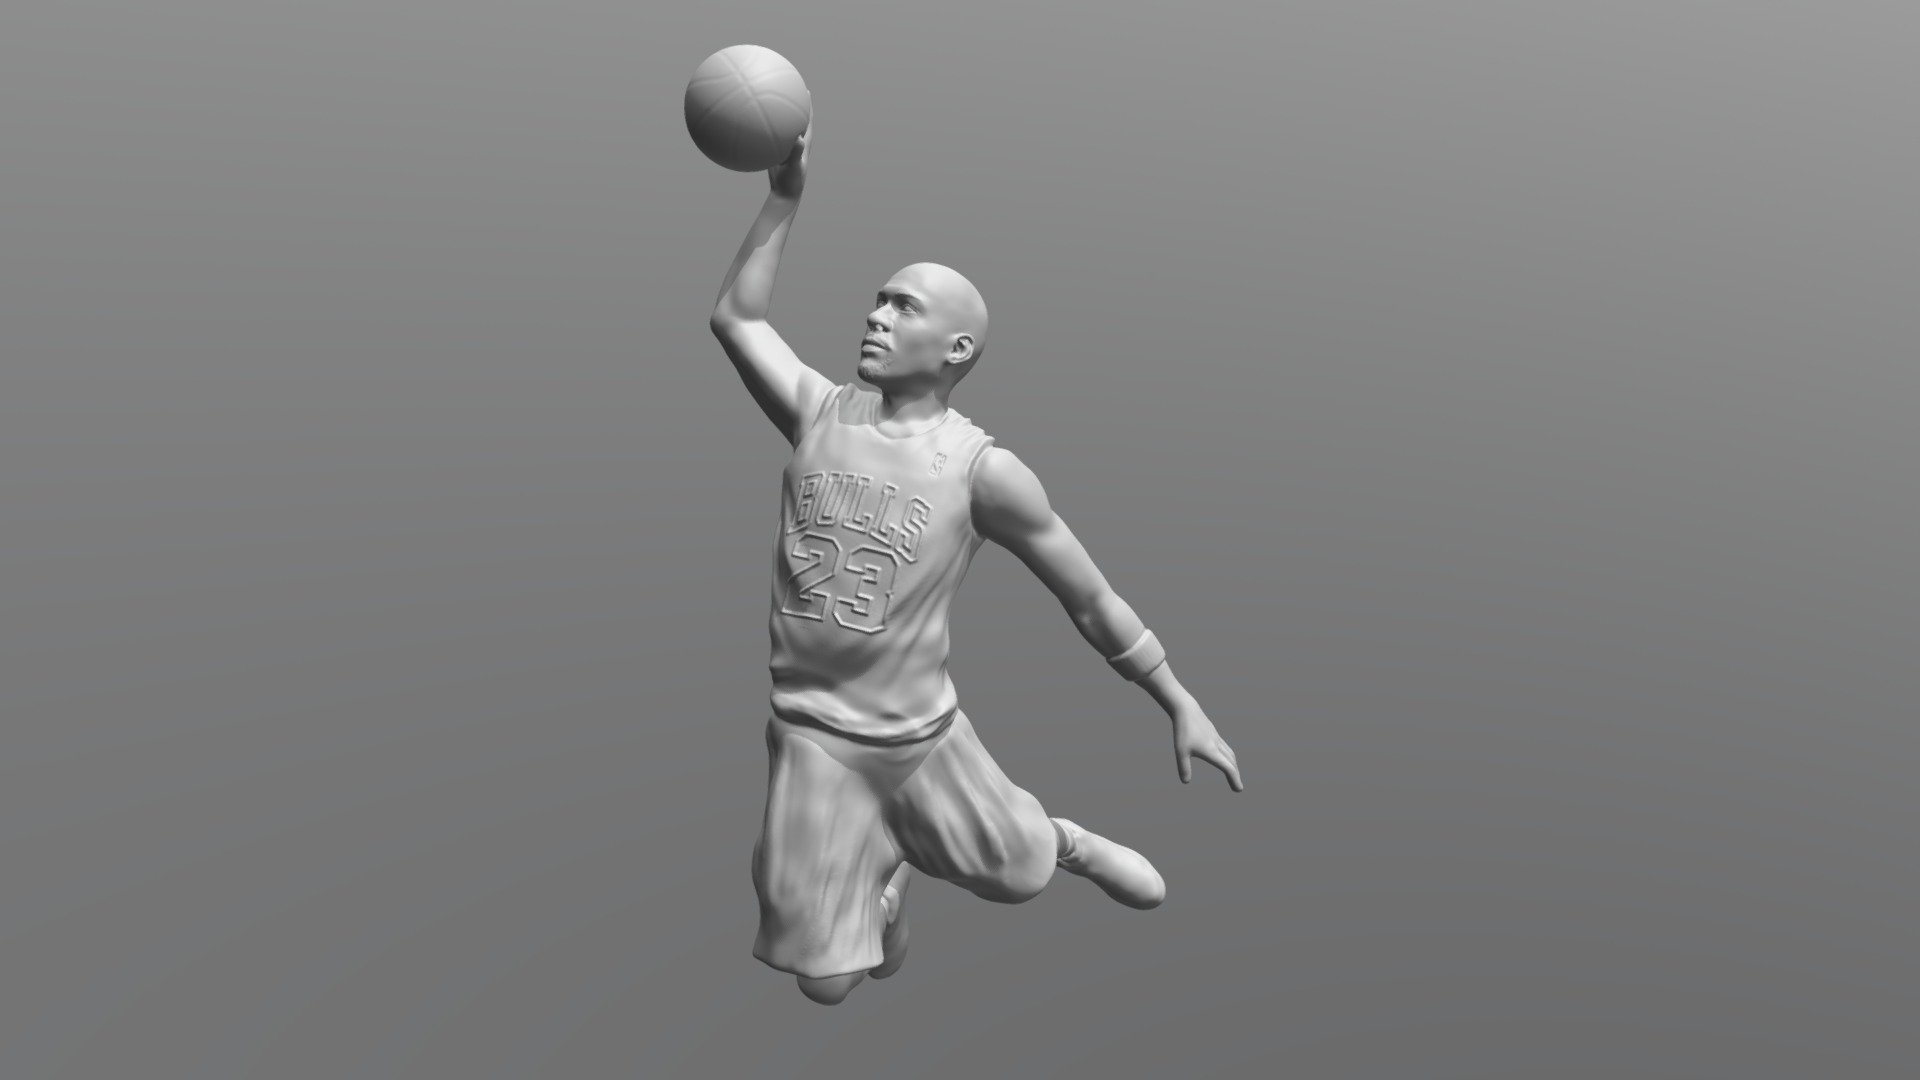 3D model Michael Jordan for 3D printing - This is a 3D model of the Michael Jordan for 3D printing. The 3D model is about a woman playing basketball.